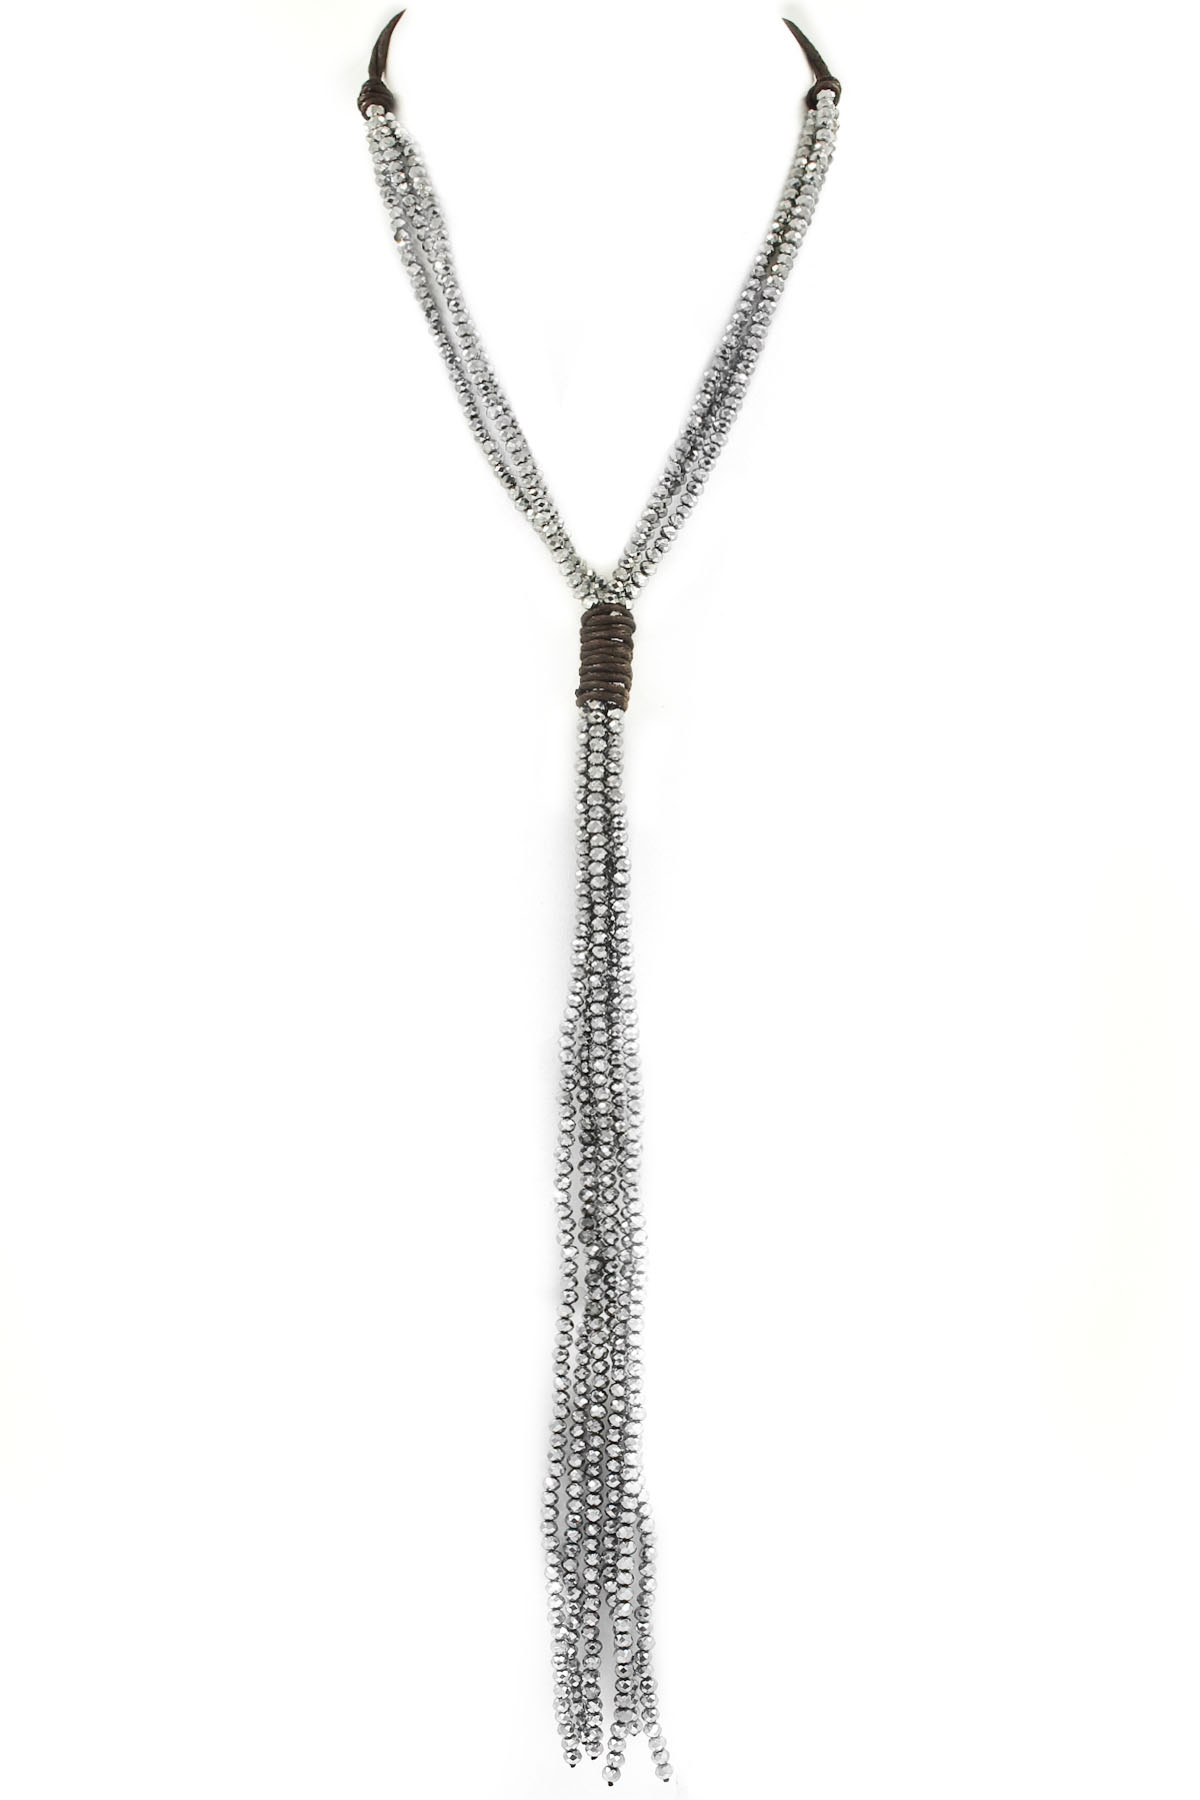 Layered Faceted Bead Tassel Pull Tie Necklace - Necklaces